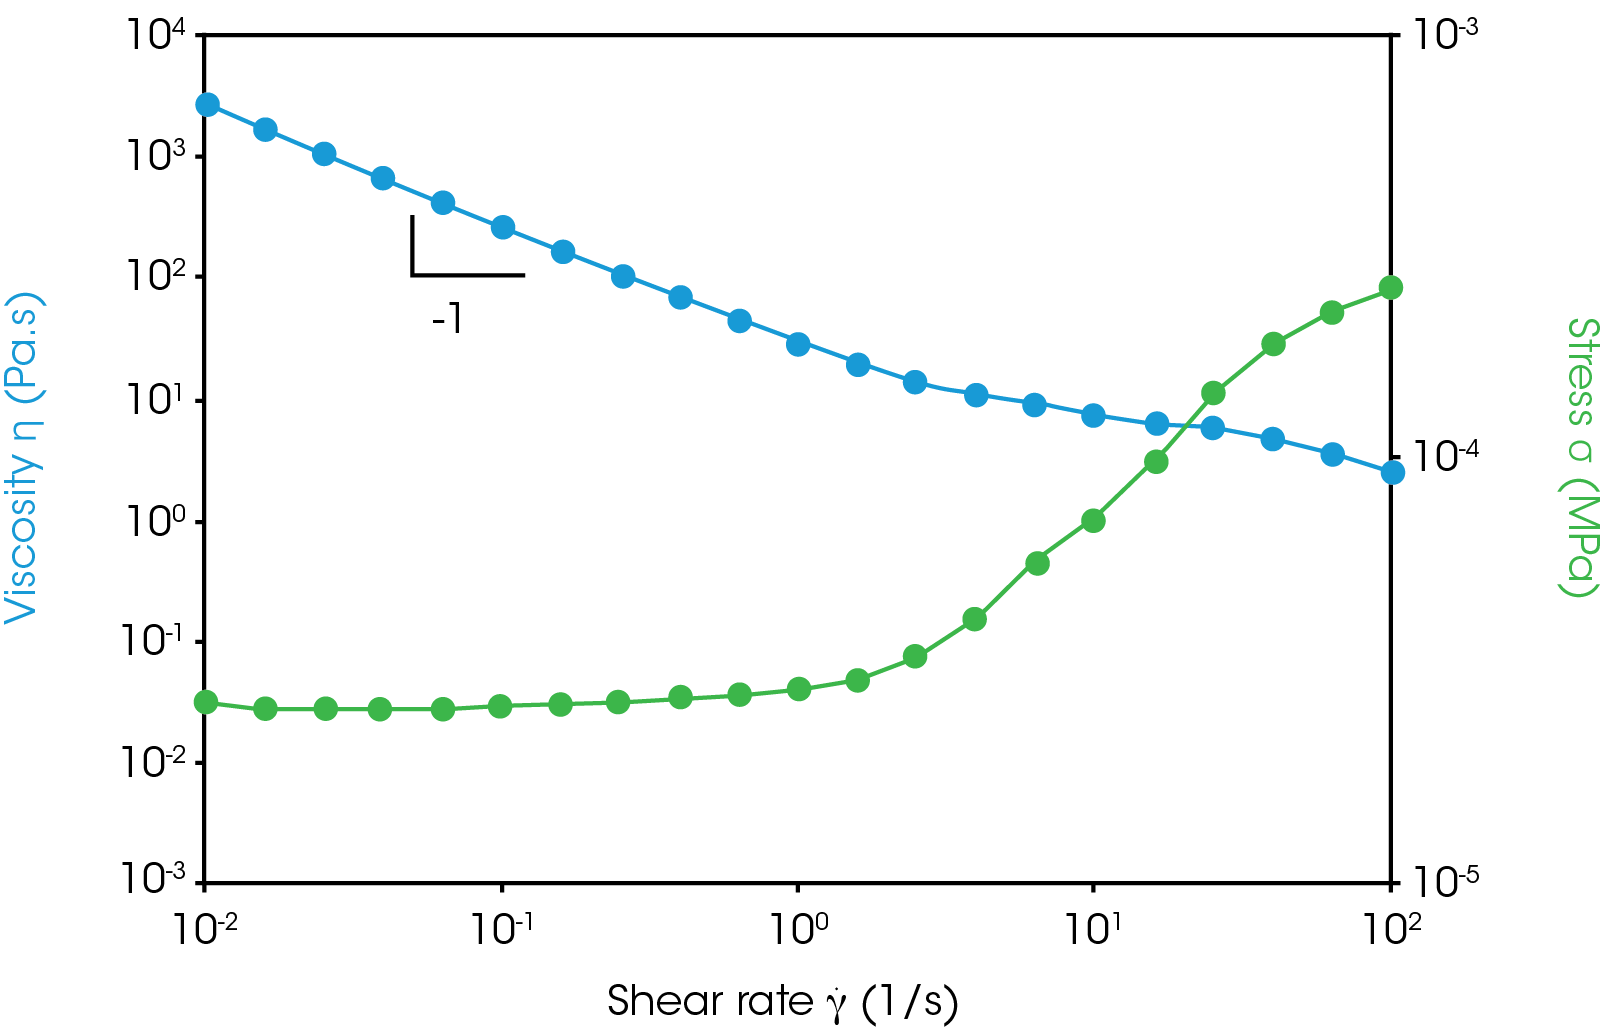 Figure 4. Flow sweep of plain non-fat Greek yogurt. A yield stress is observed at low shear. A soak time of 3 minutes was applied before the measurement.